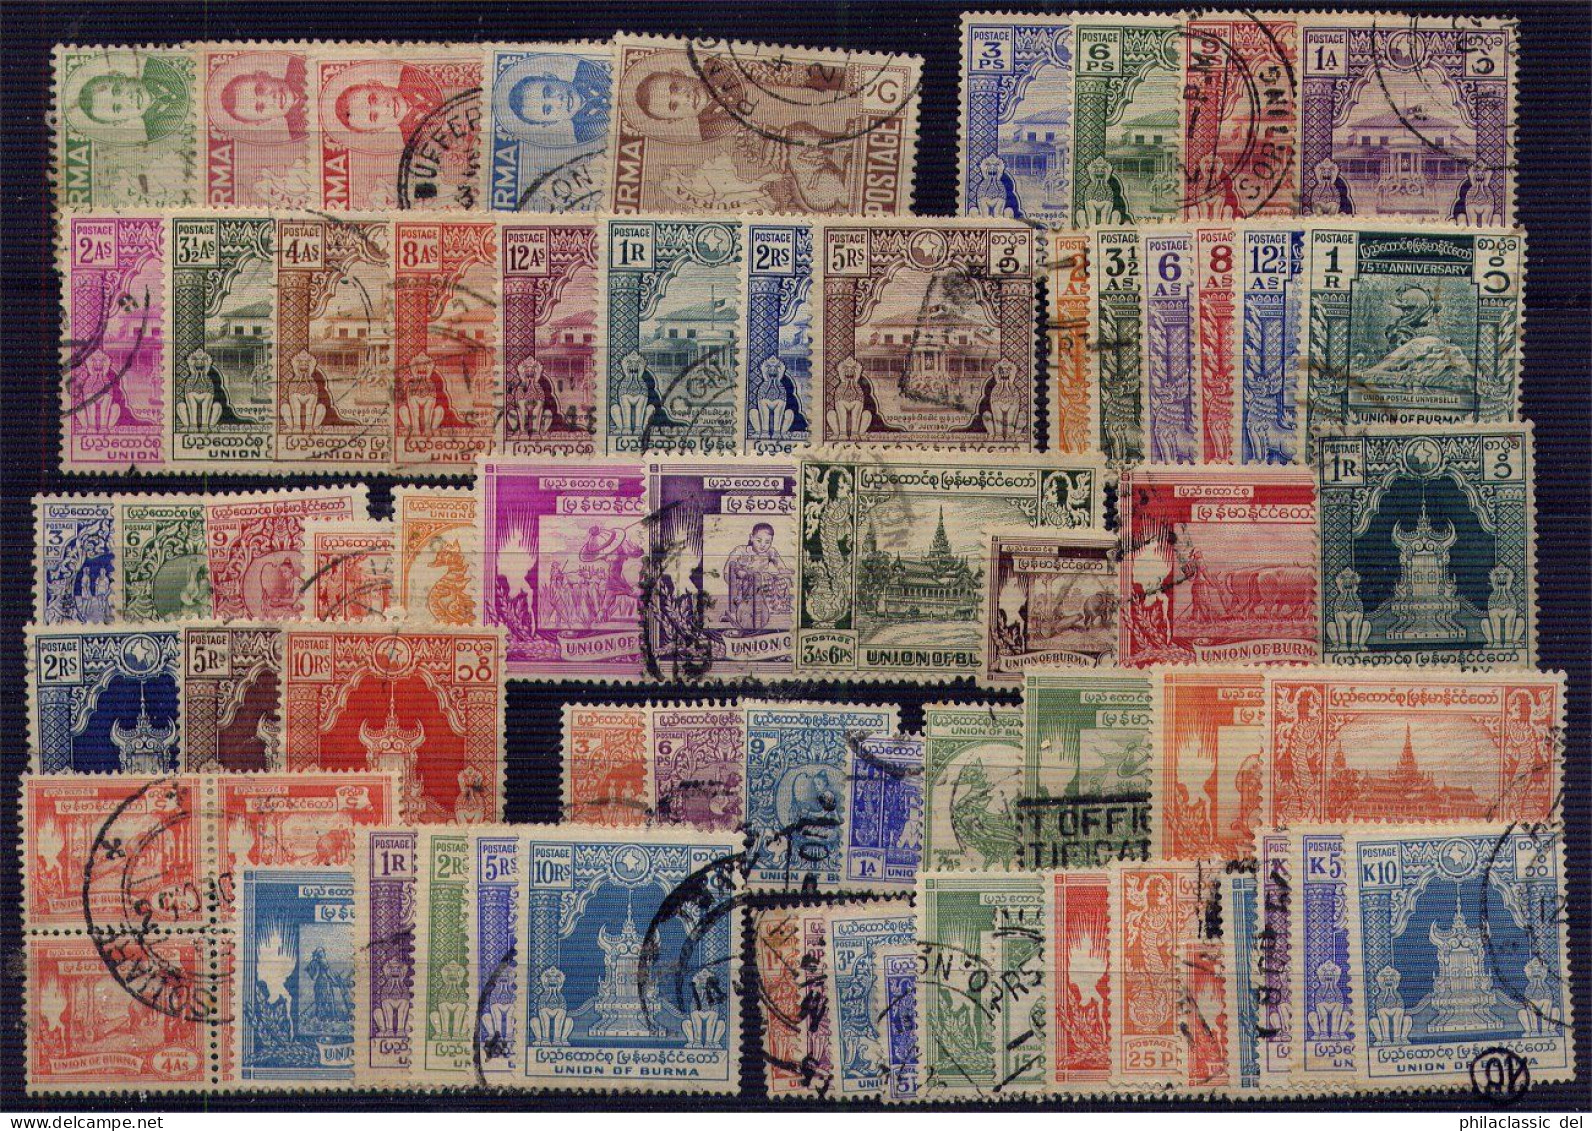 BURMA 1938 - 1954, Very Nice Nearly Complete Collection Fine Cancelled Cat Val 1150 Pounds - Birmania (...-1947)